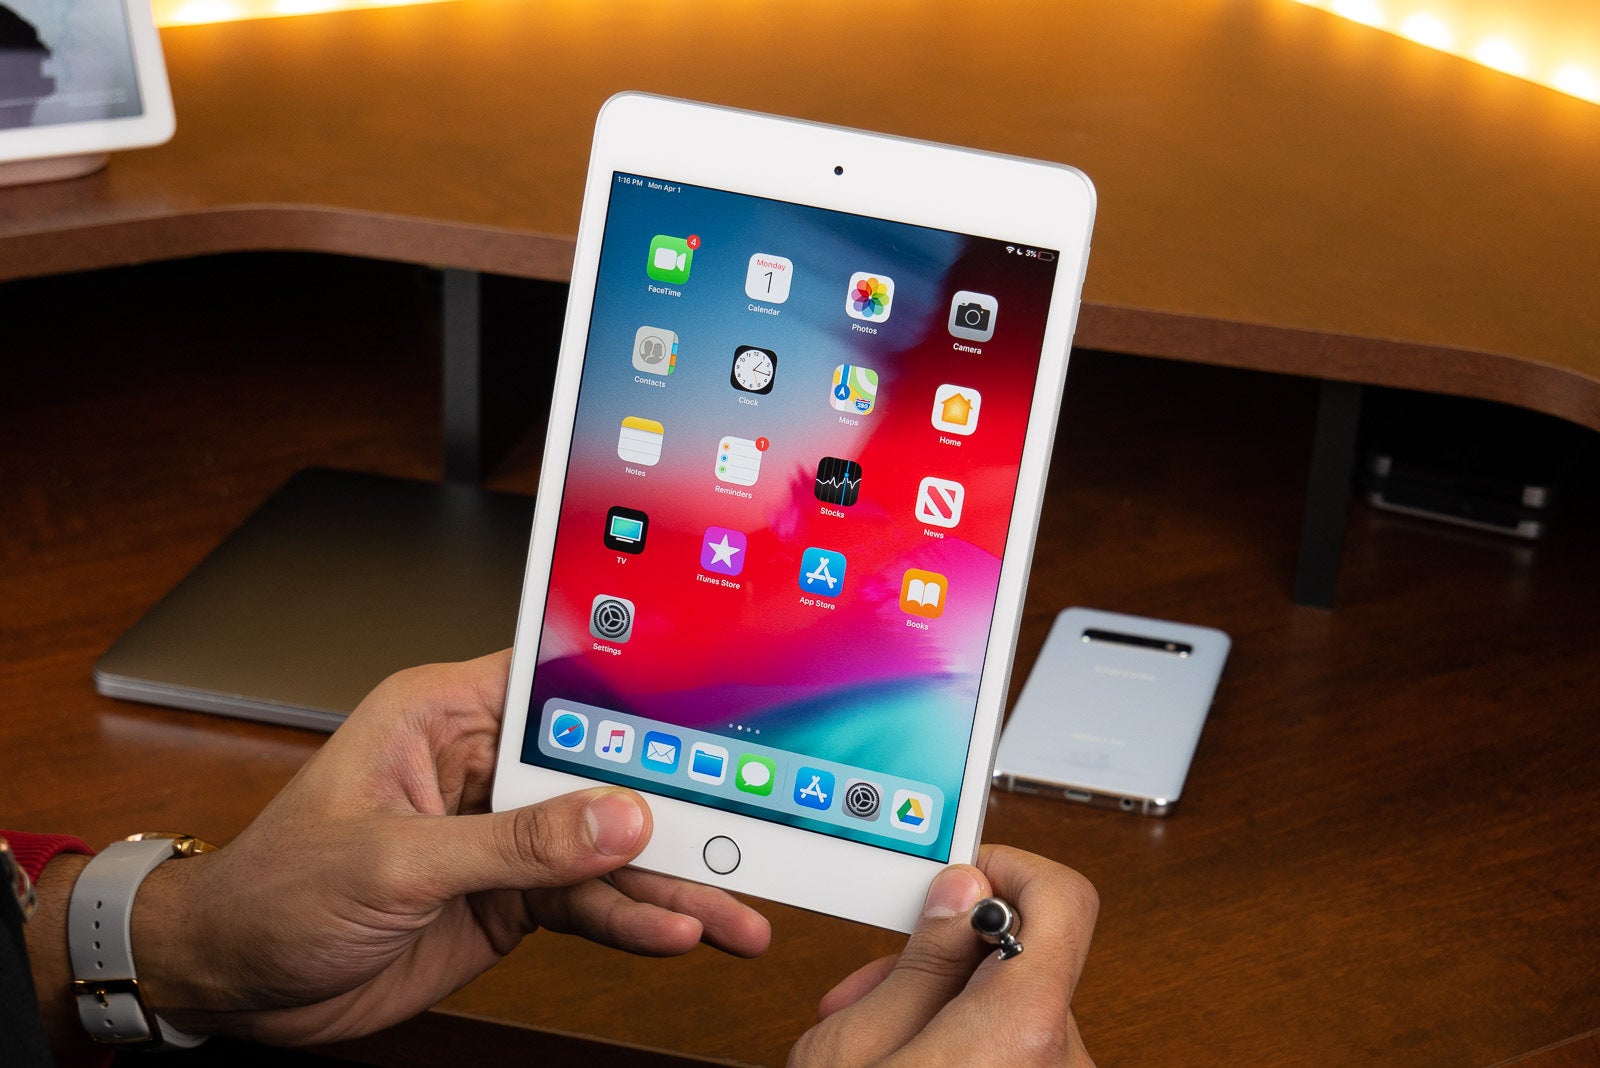 Apple still sells the iPad mini and the next one is planned for 2021 - Why is Apple not making a foldable iPhone yet?